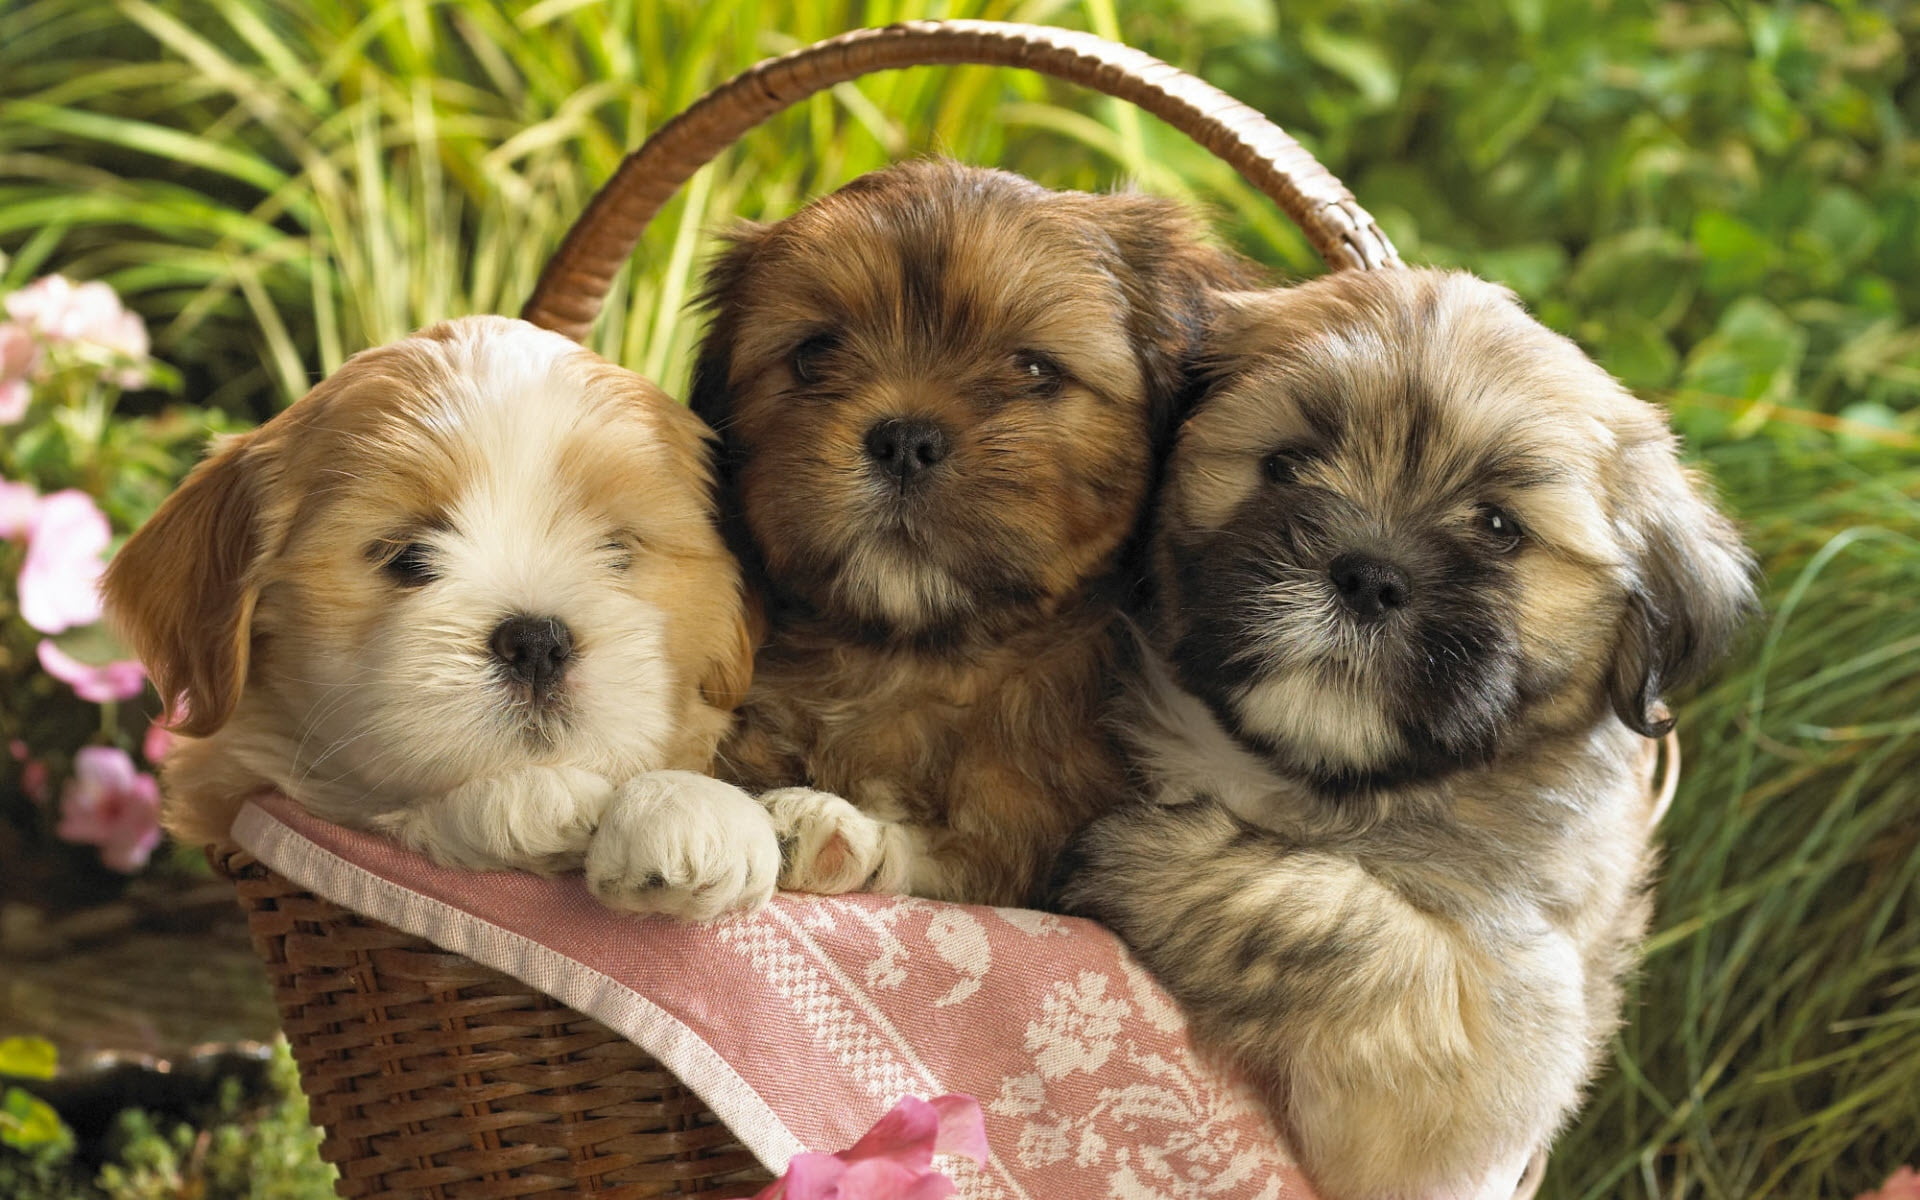 three puppies, shopping, herb, sit, canine, pets, domestic, dog